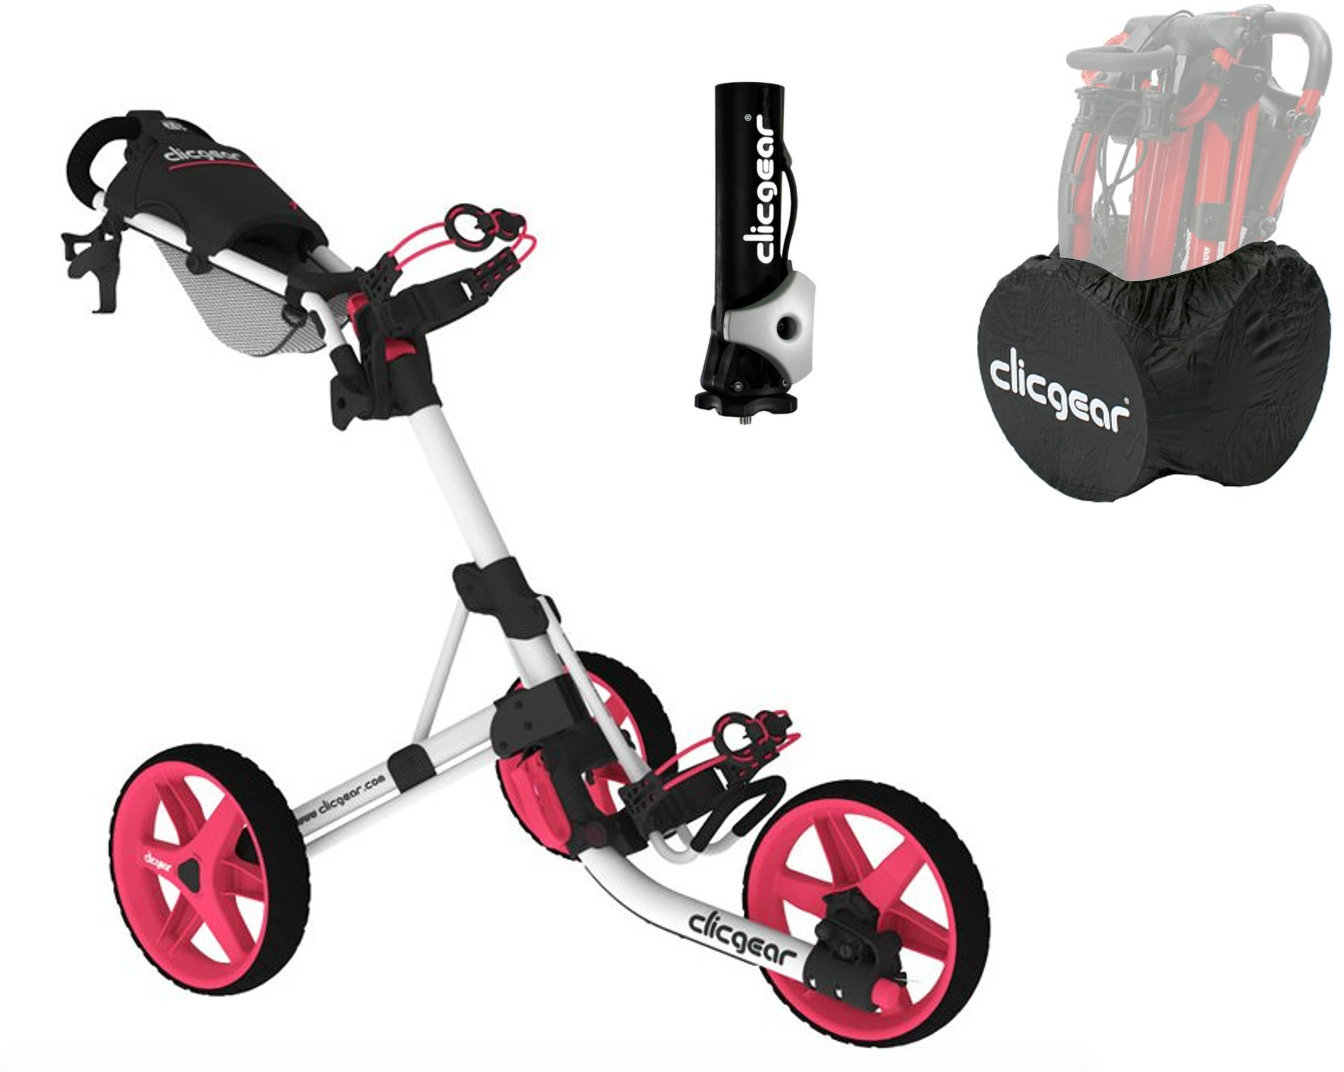 Pushtrolley Clicgear 3.5+ Arctic/Pink DELUXE SET Pushtrolley